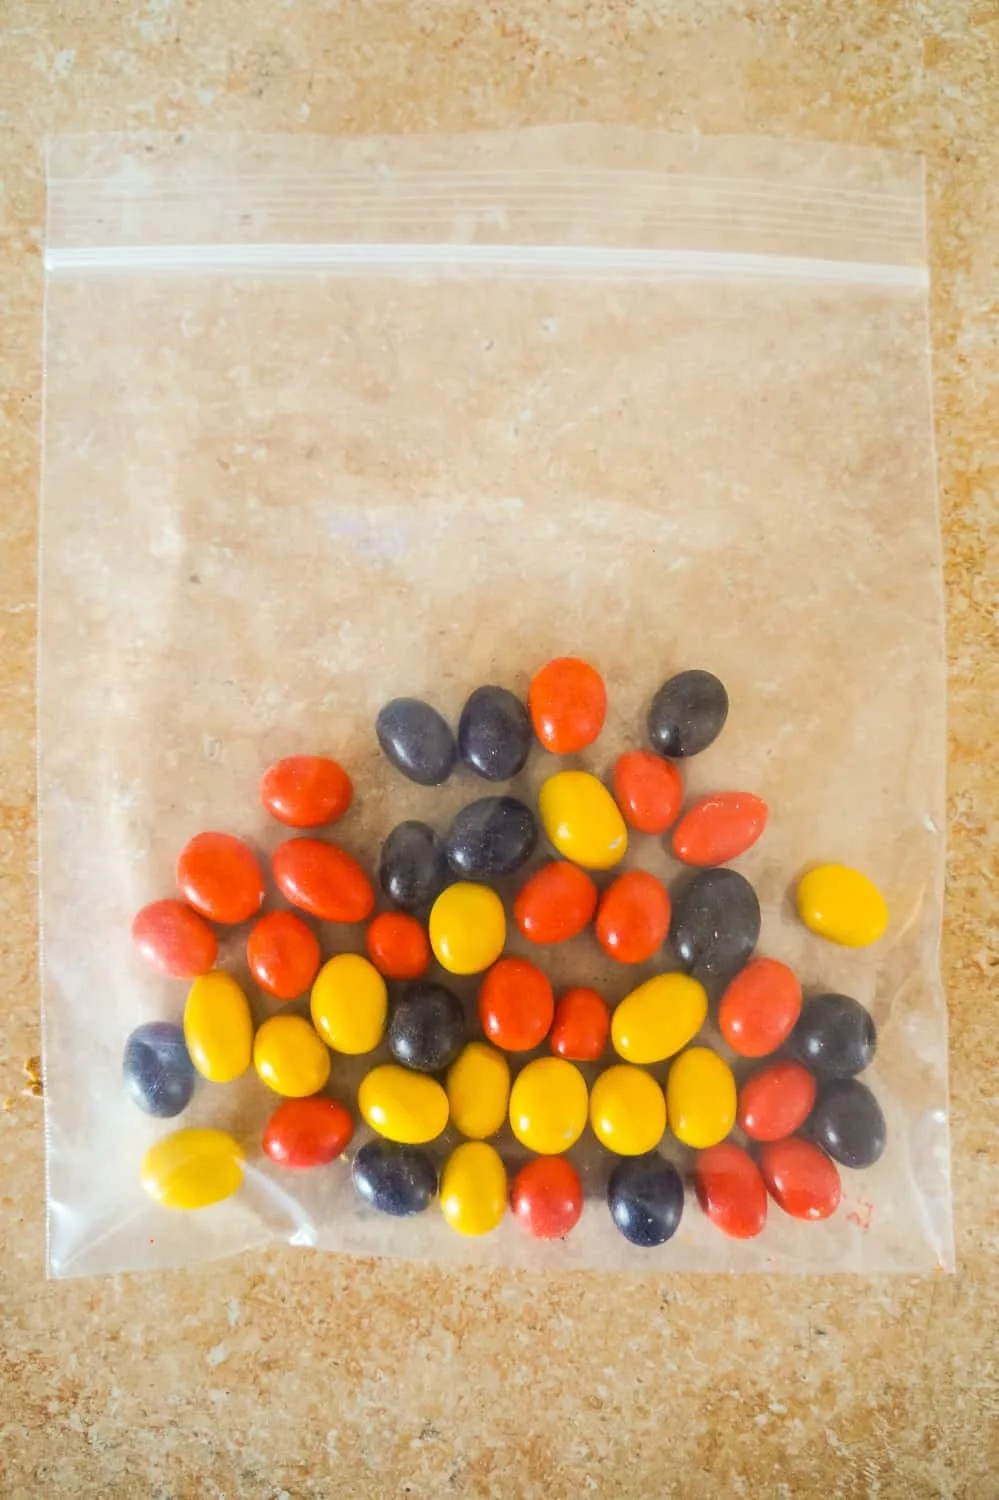 Reese's Pieces Peanut candies in a Ziploc bag